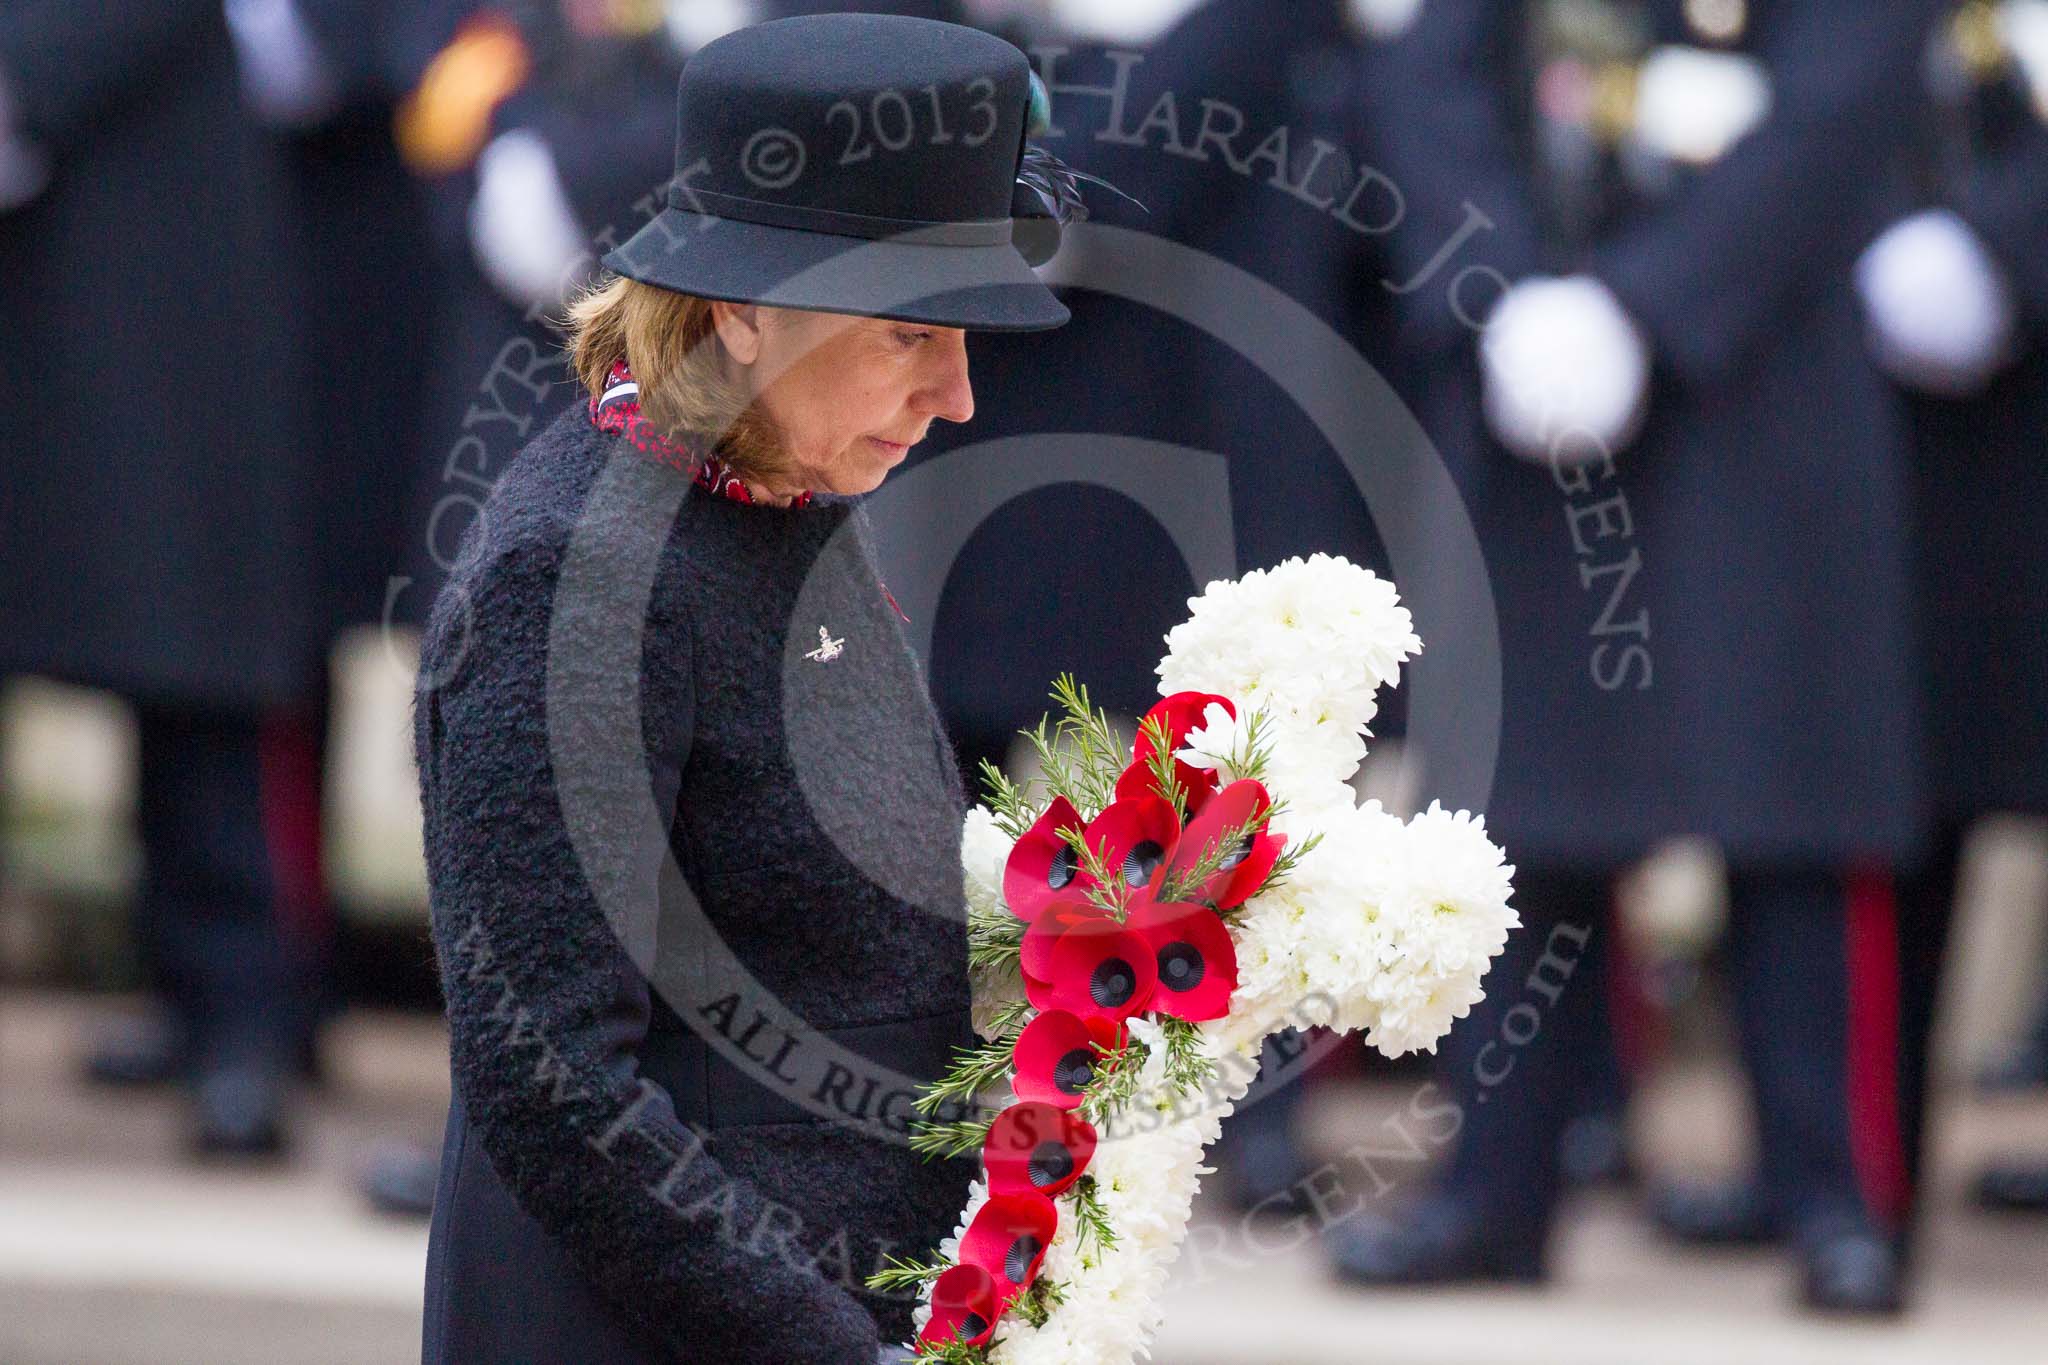 Remembrance Sunday at the Cenotaph 2015: A group I can't identify laying a wreath at the Cenotaph after the Ceremony and before the March Past. Image #354, 08 November 2015 11:30 Whitehall, London, UK